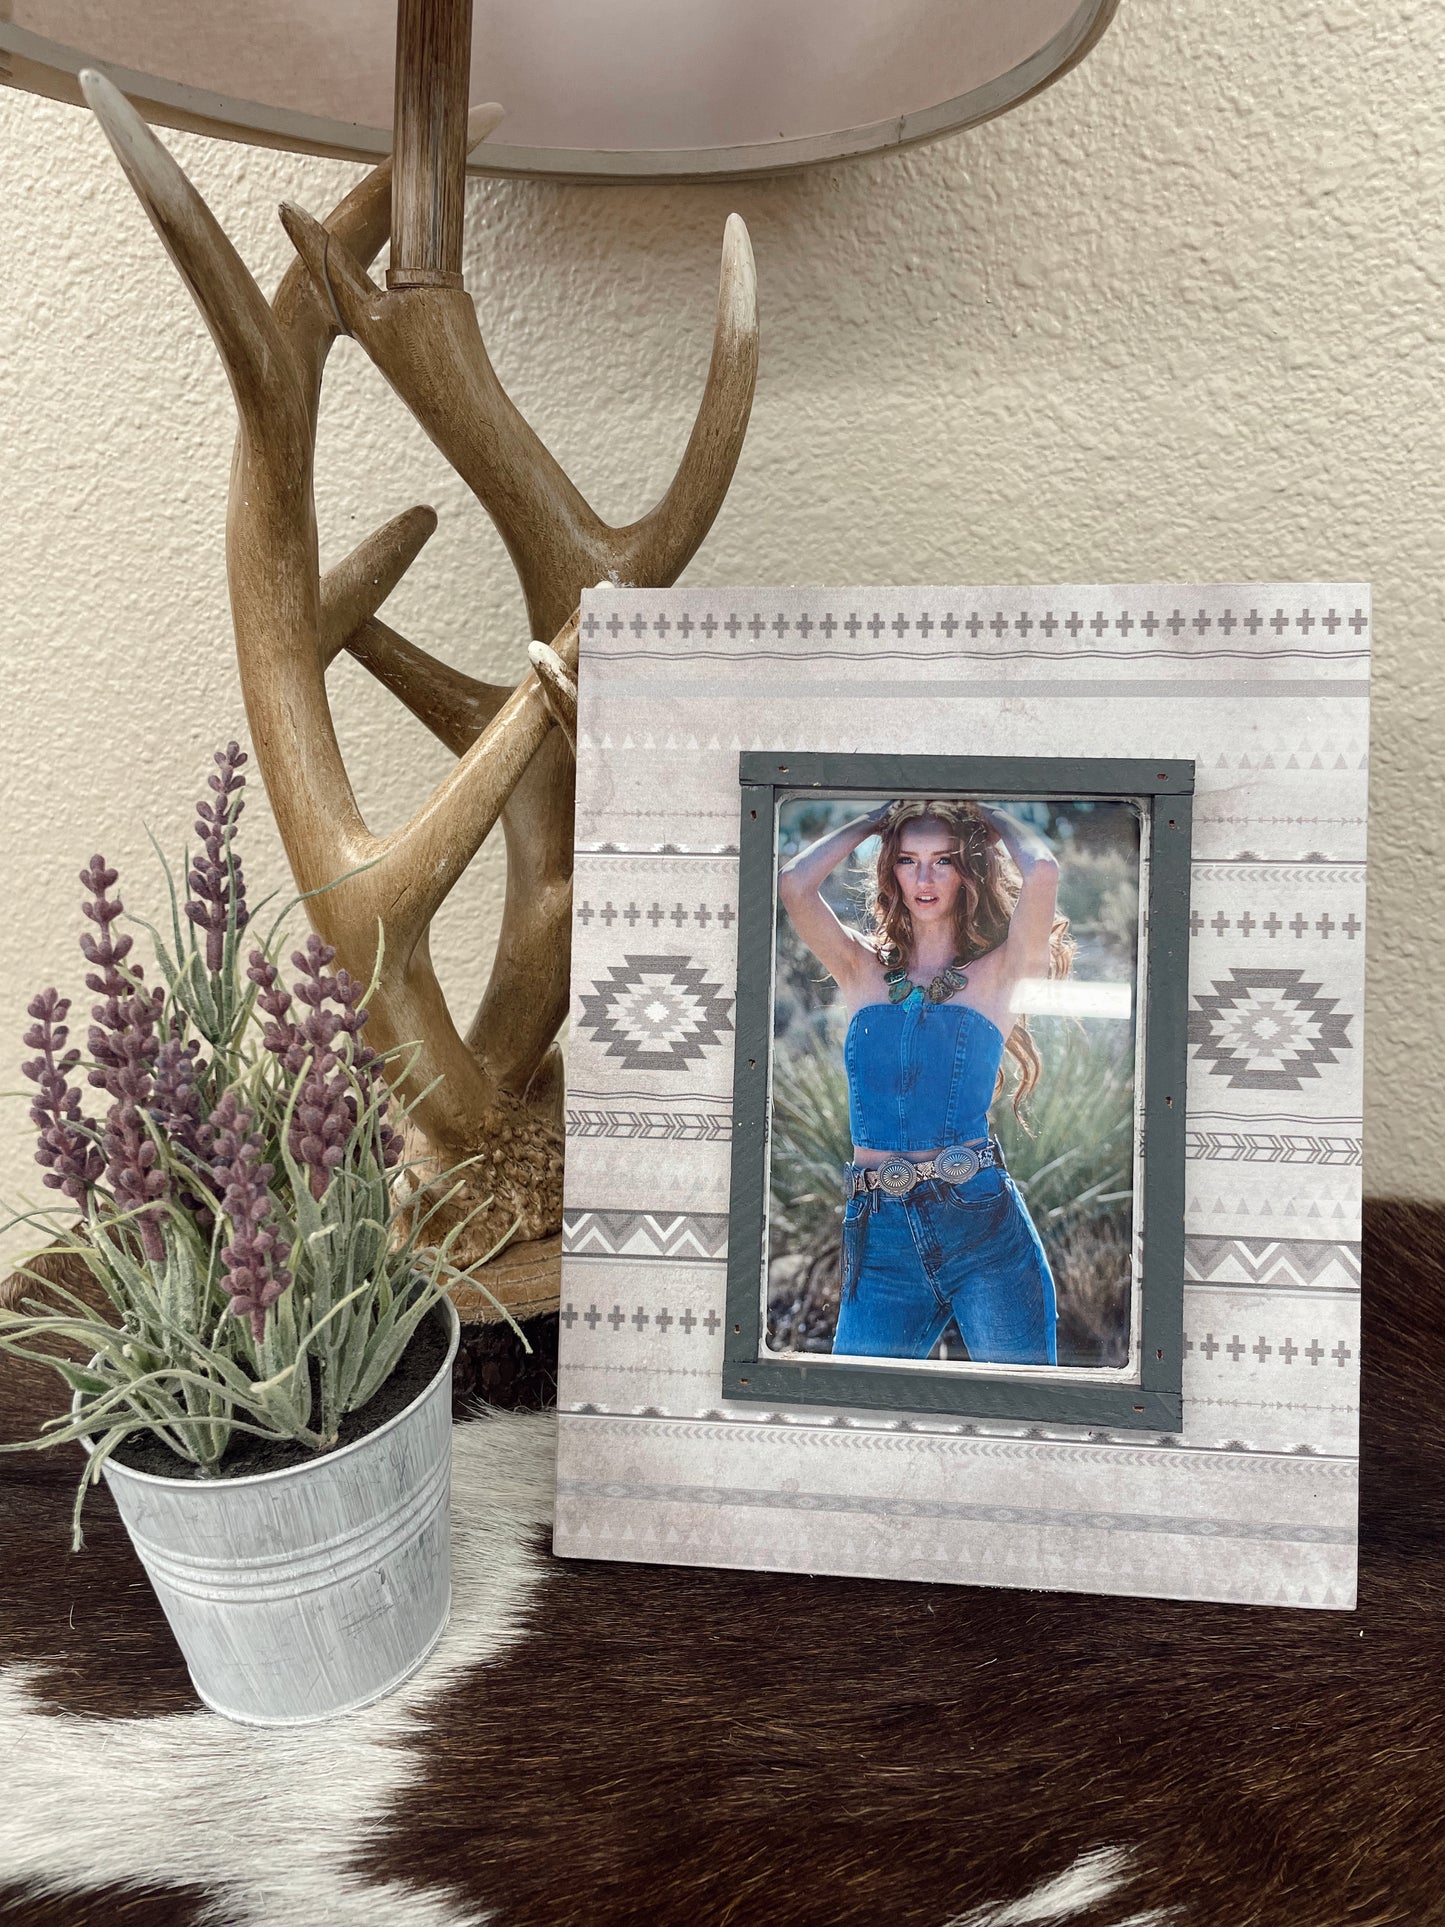 The Free Spirit Aztec Picture Frame